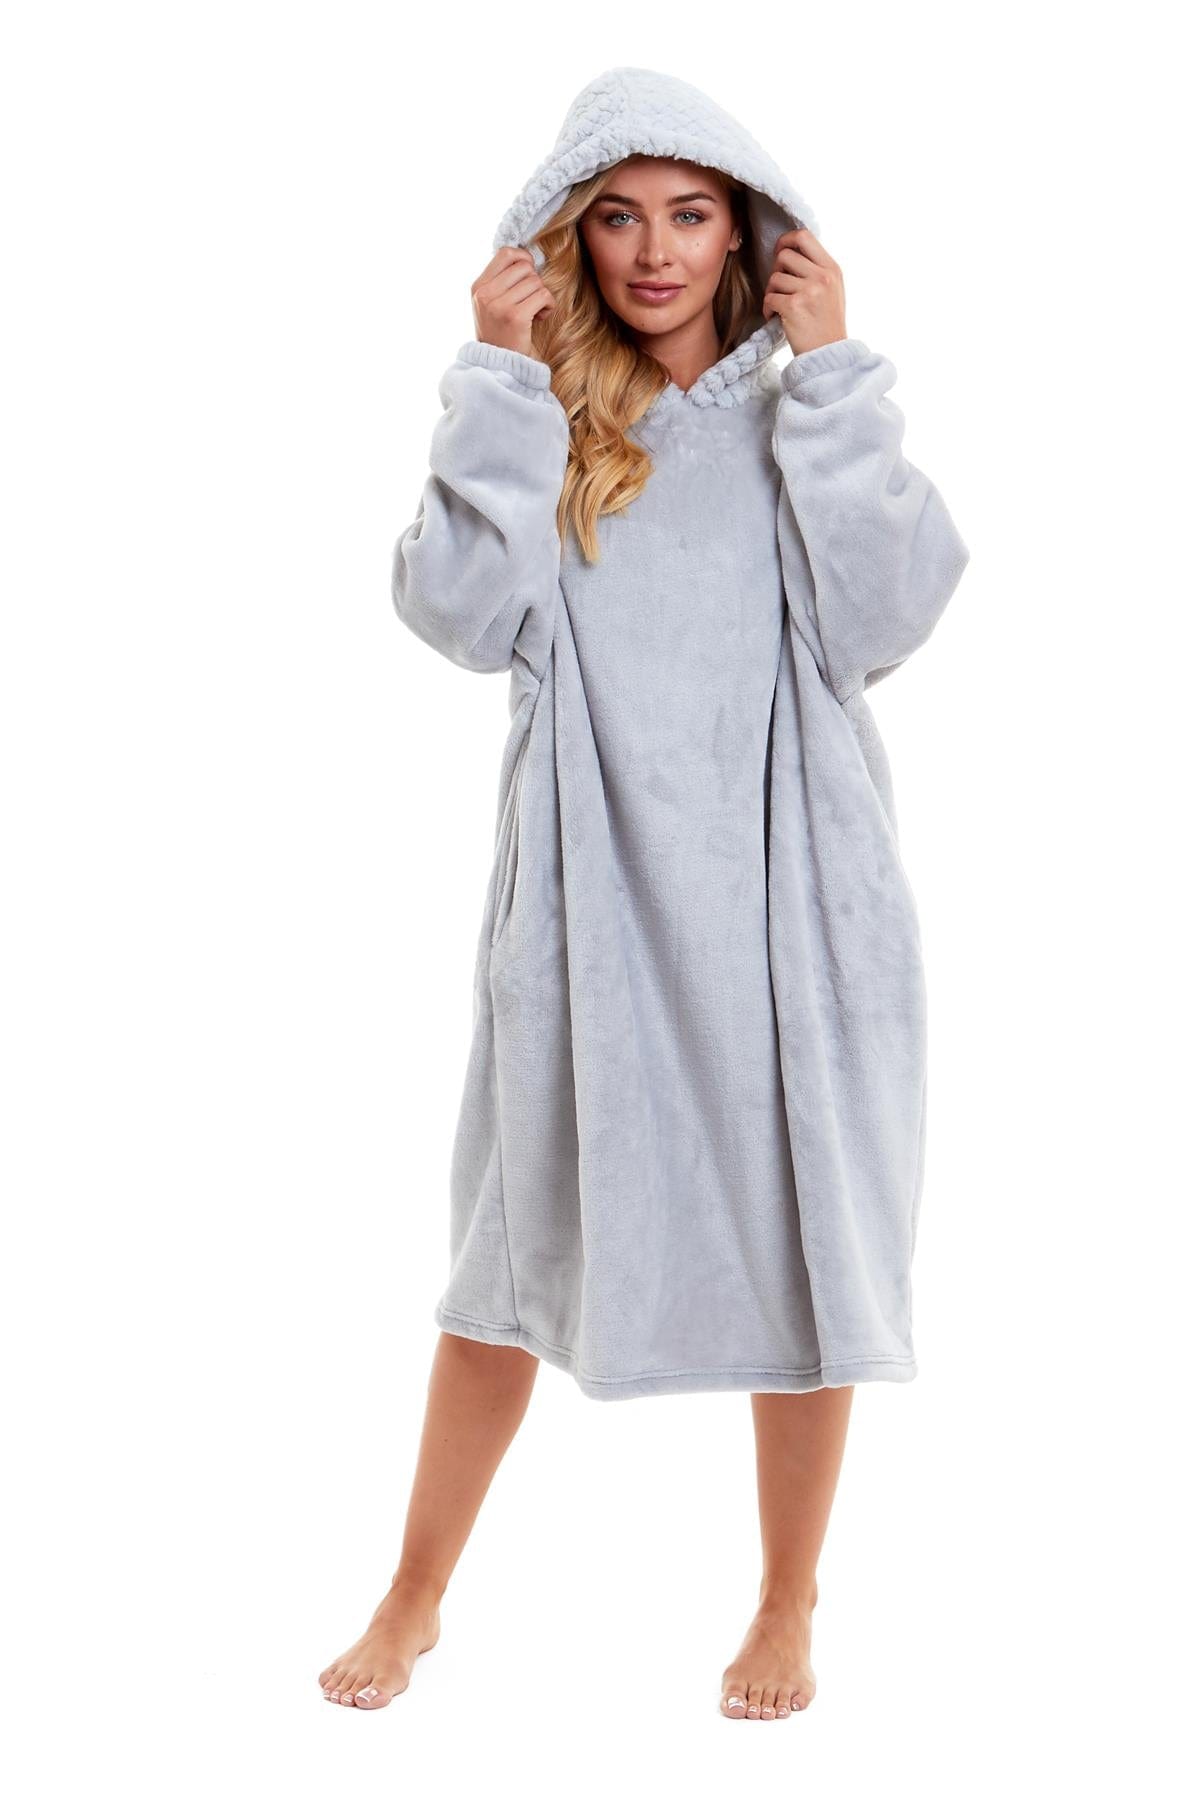 Women's Plush Hooded Poncho Blanket Oversized Thermal Hoodie Top Long Length Daisy Dreamer Dressing Gown